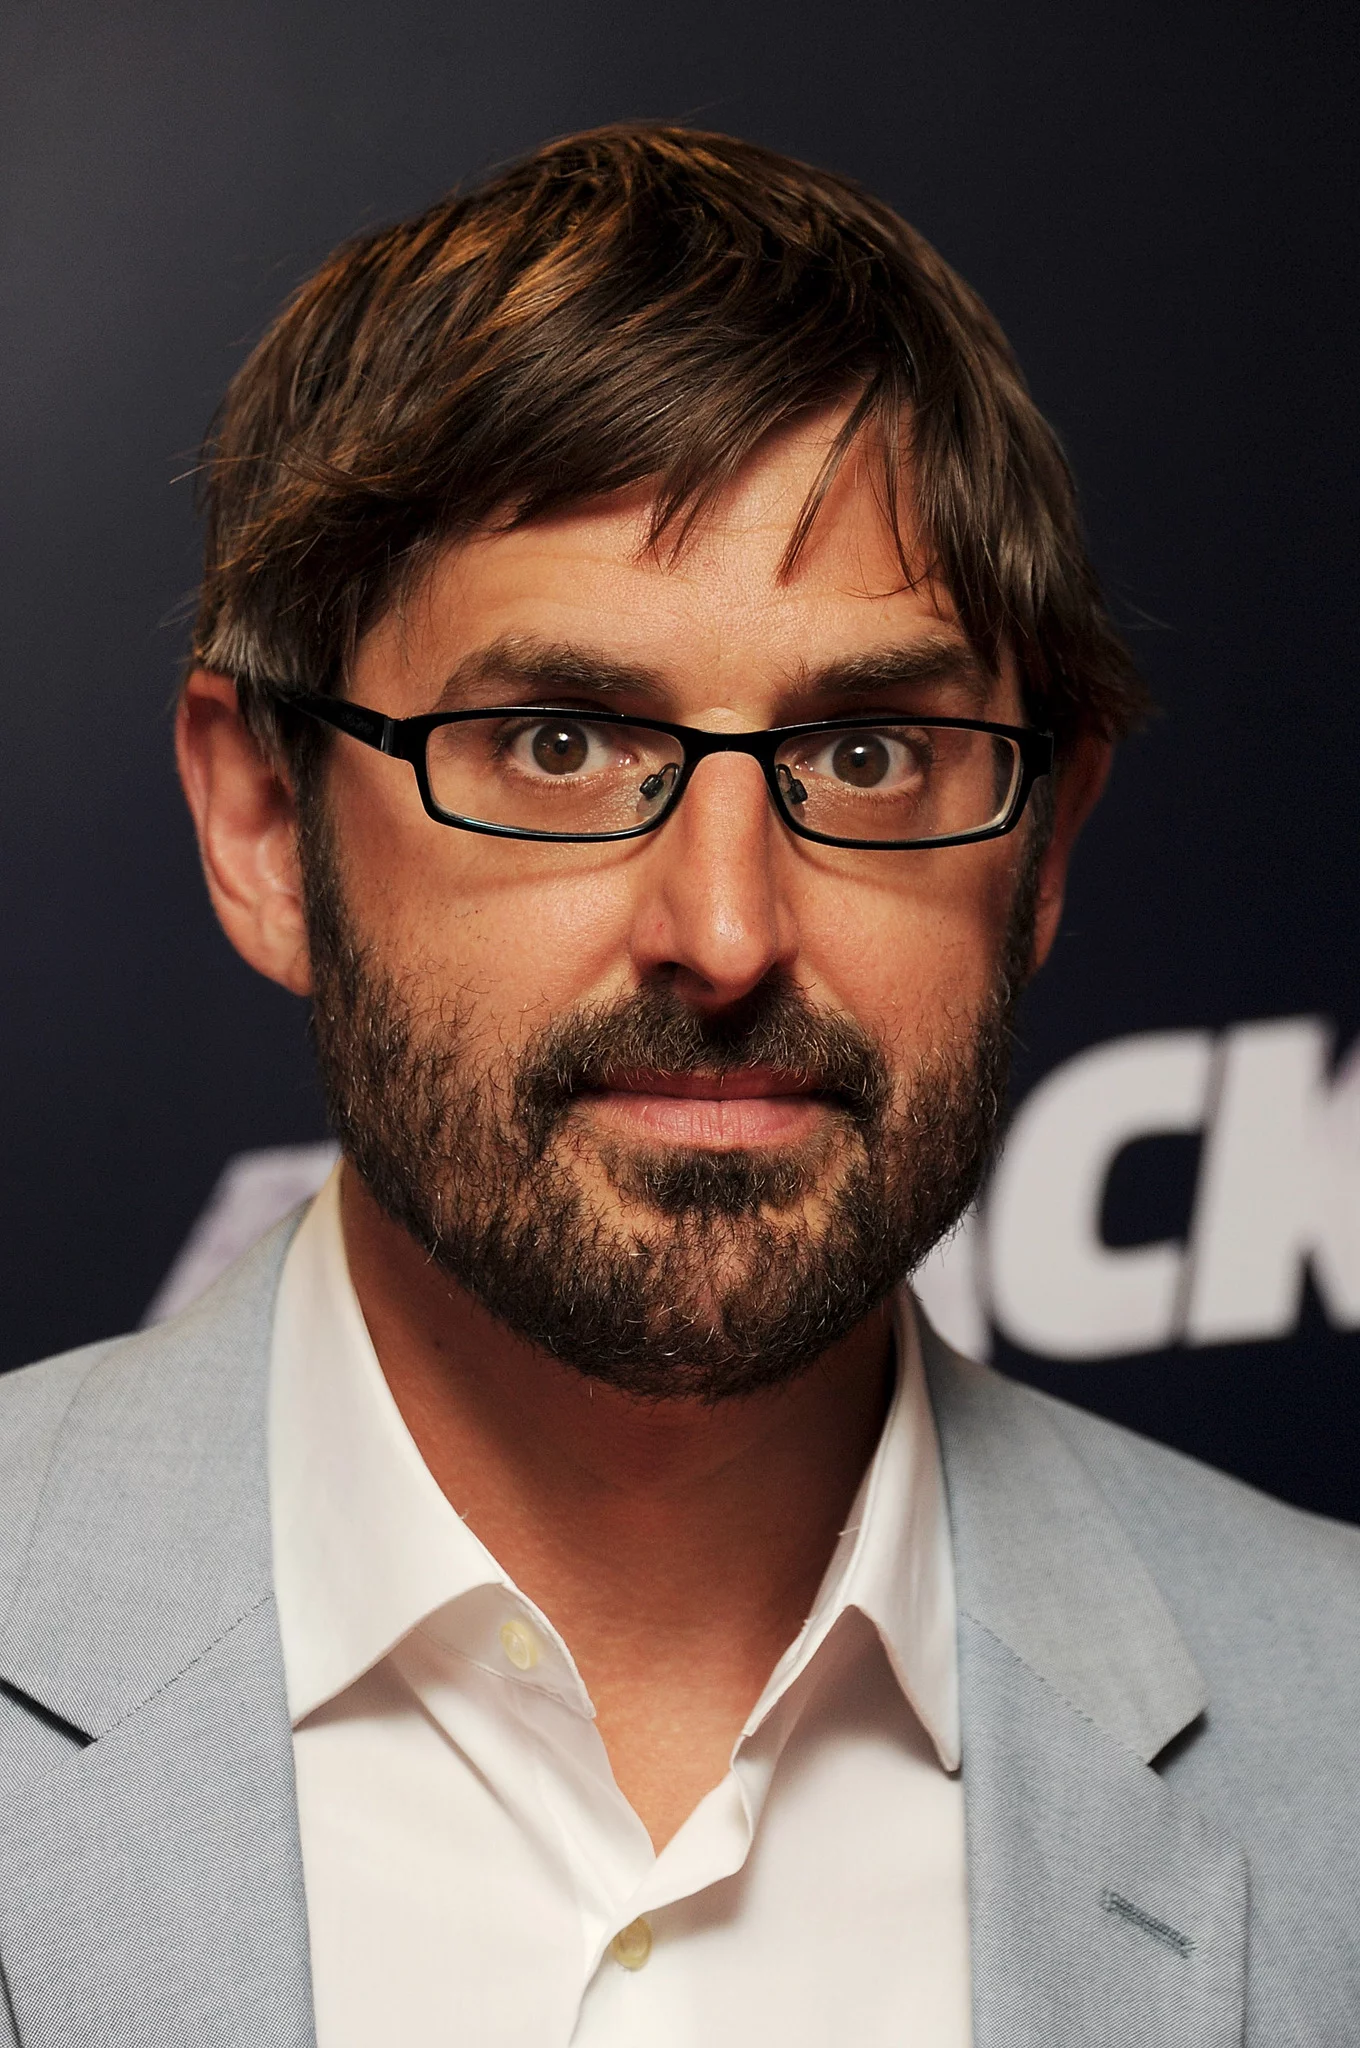 Louis Theroux documentary maker and keynote speaker